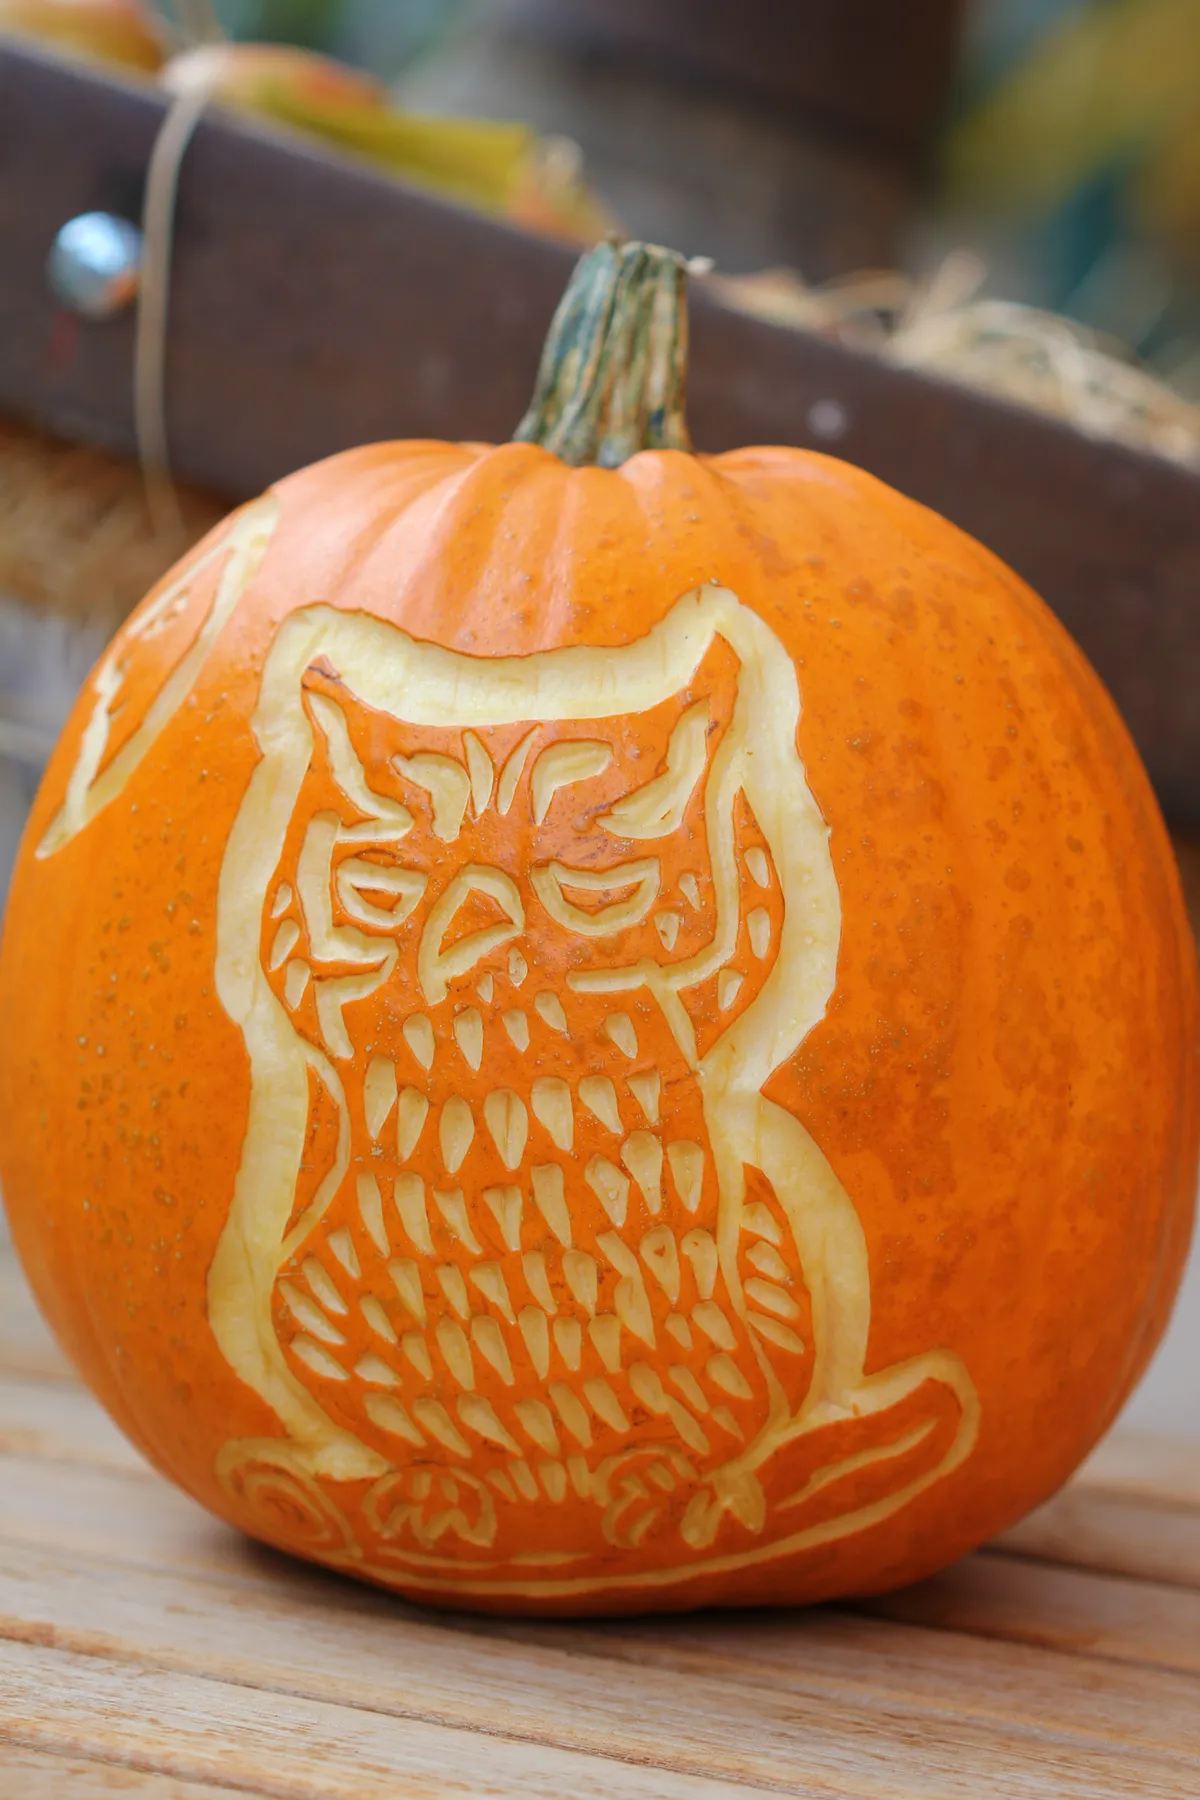 A pumpkin in daylight and not lit up, with an owl carved partially into the skin.